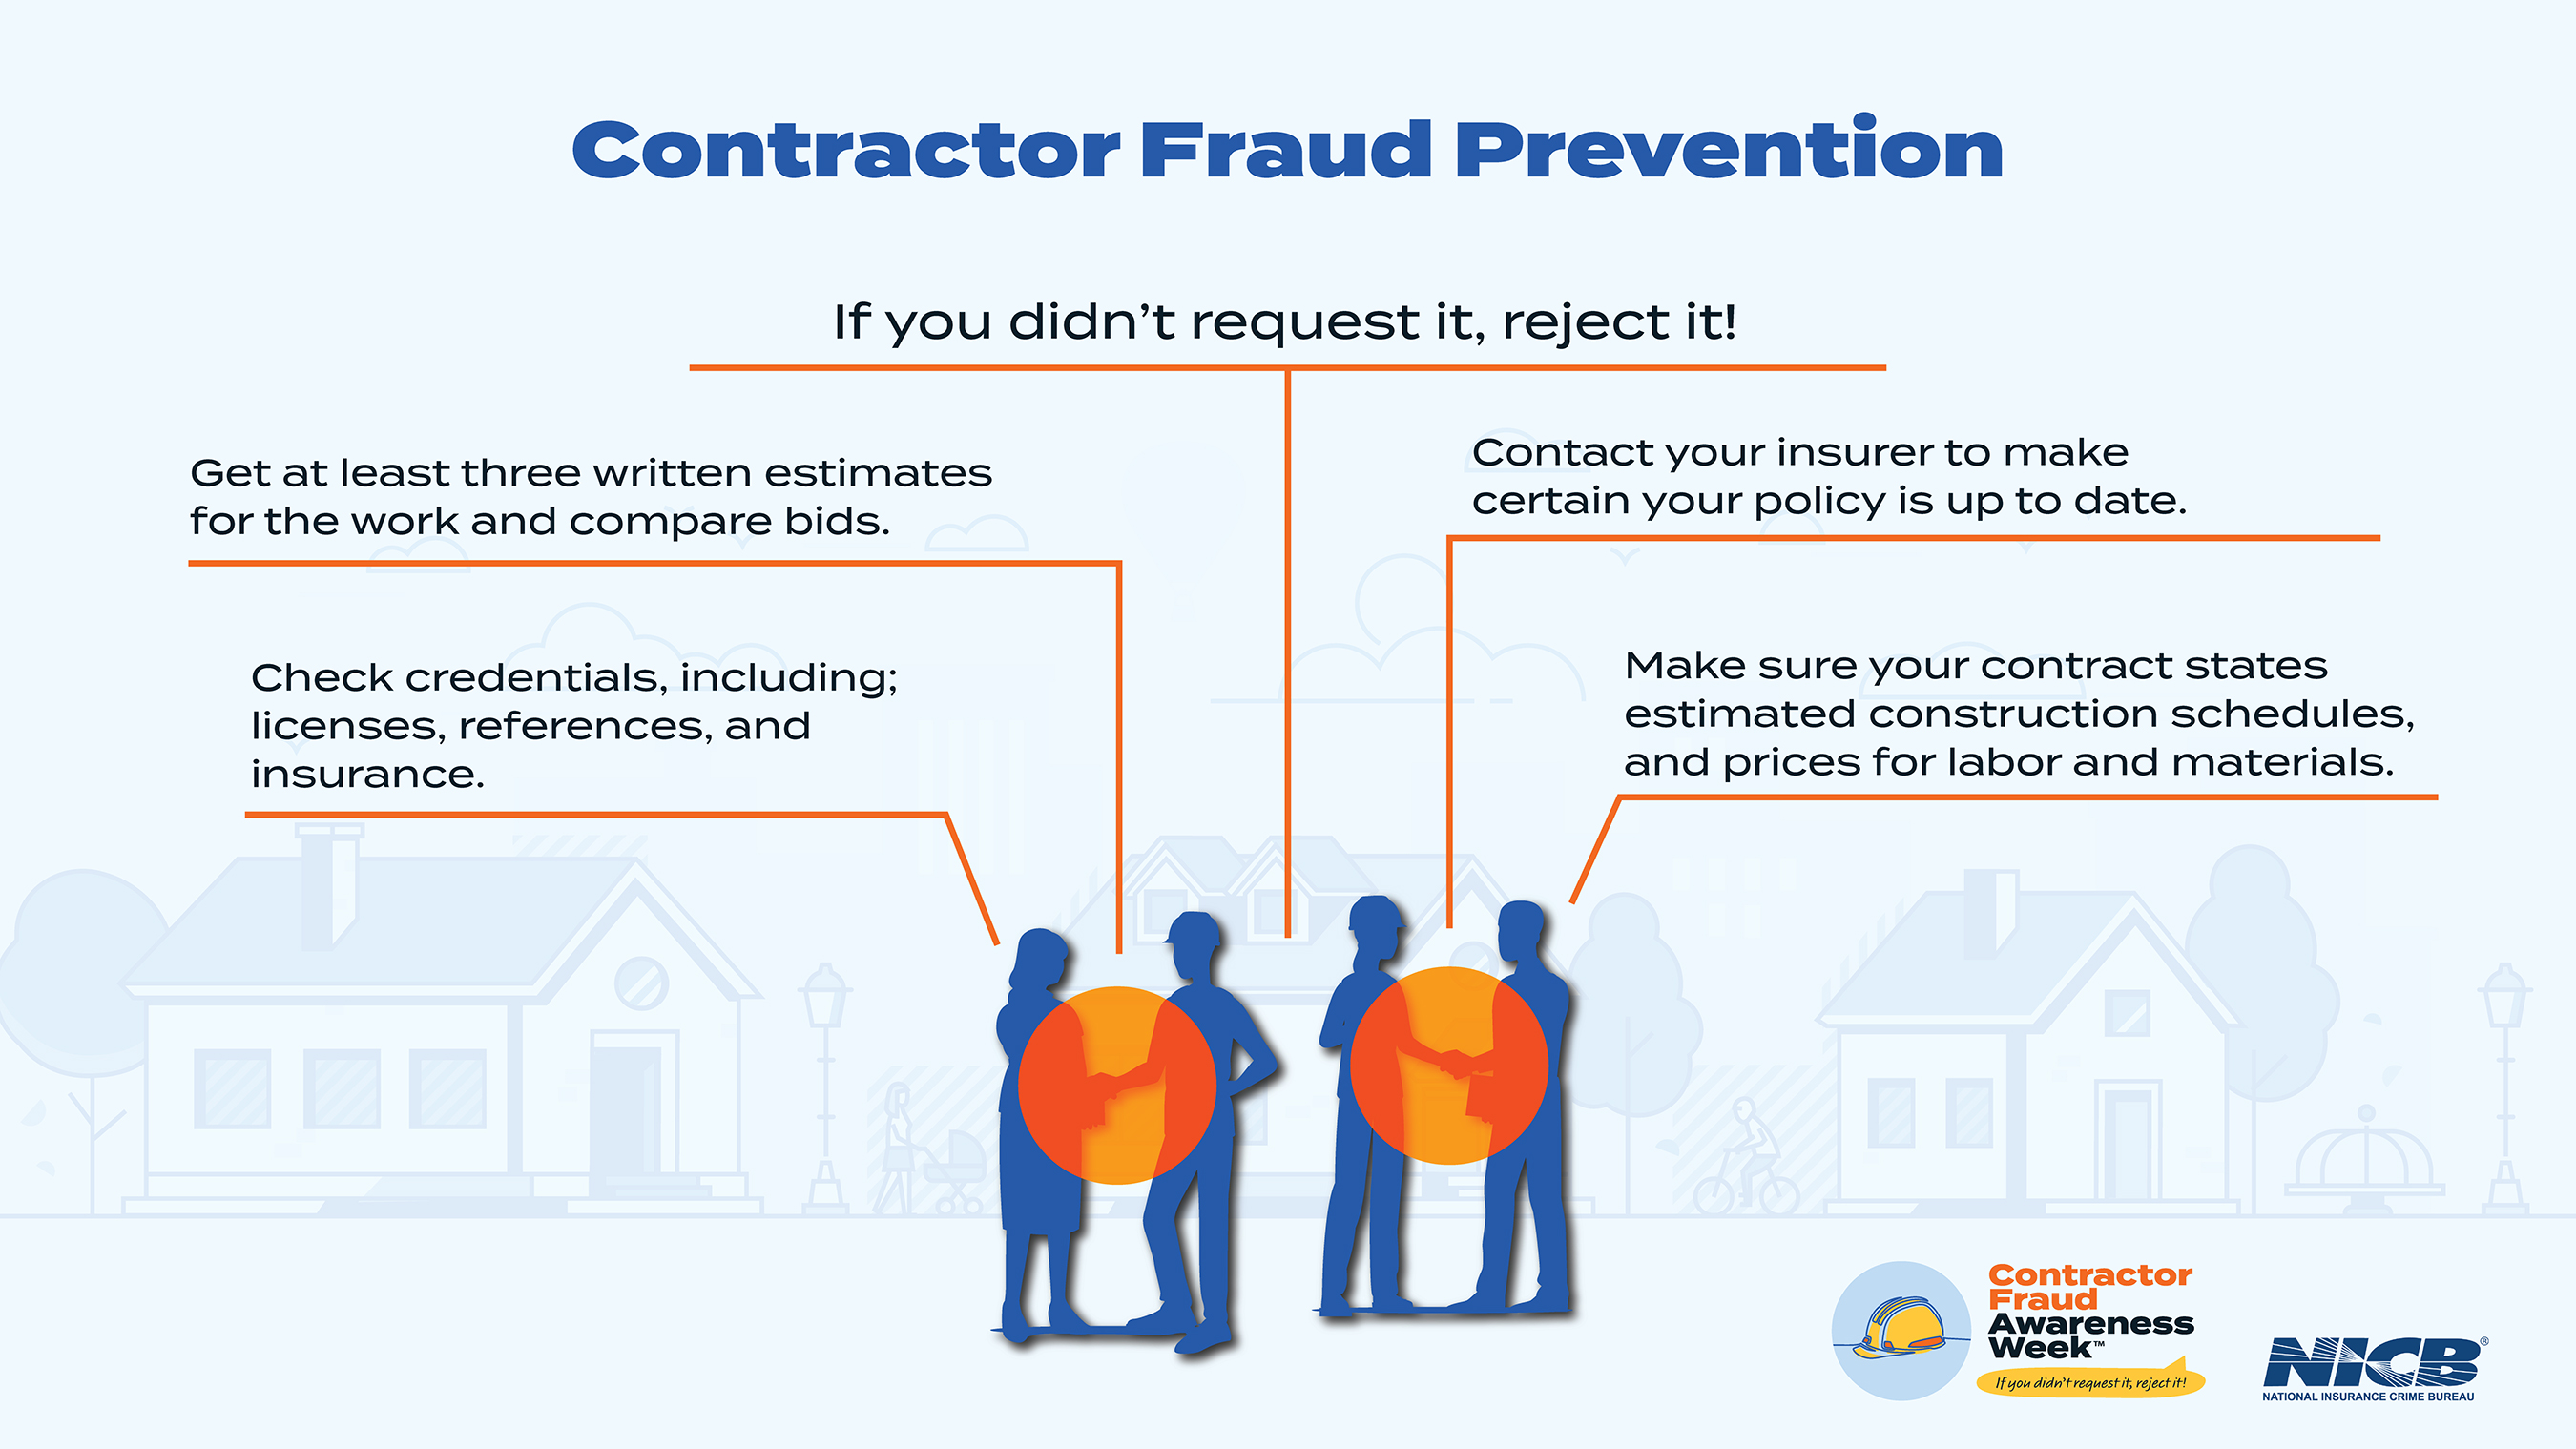 After a disaster, following a few simple steps can help you avoid becoming the victim of contractor fraud.